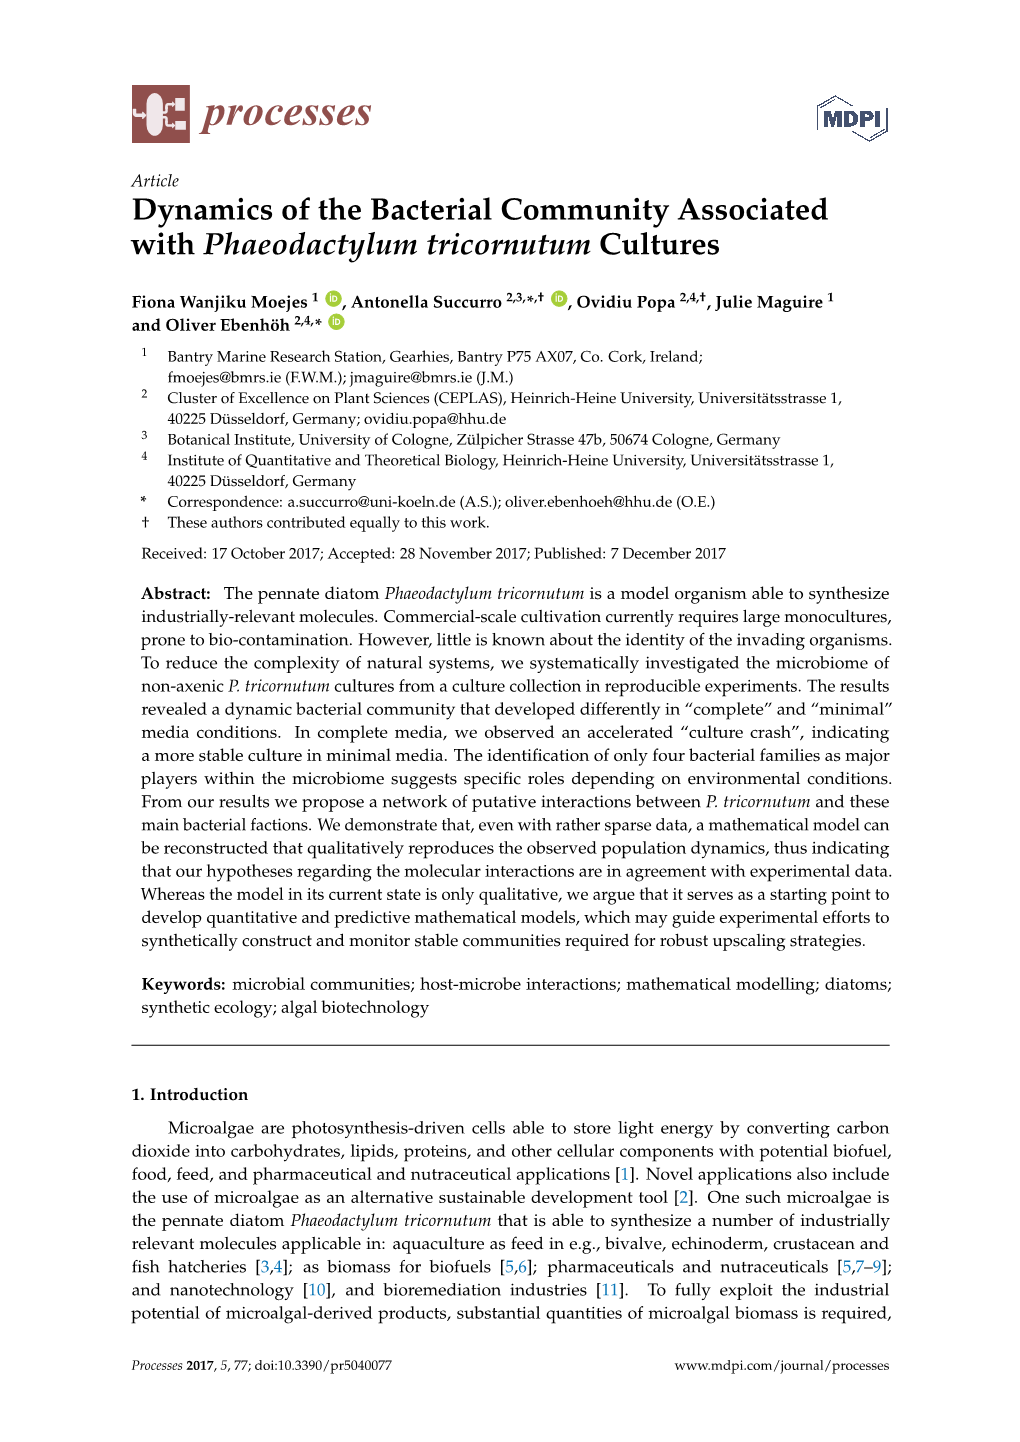 Dynamics of the Bacterial Community Associated with Phaeodactylum Tricornutum Cultures